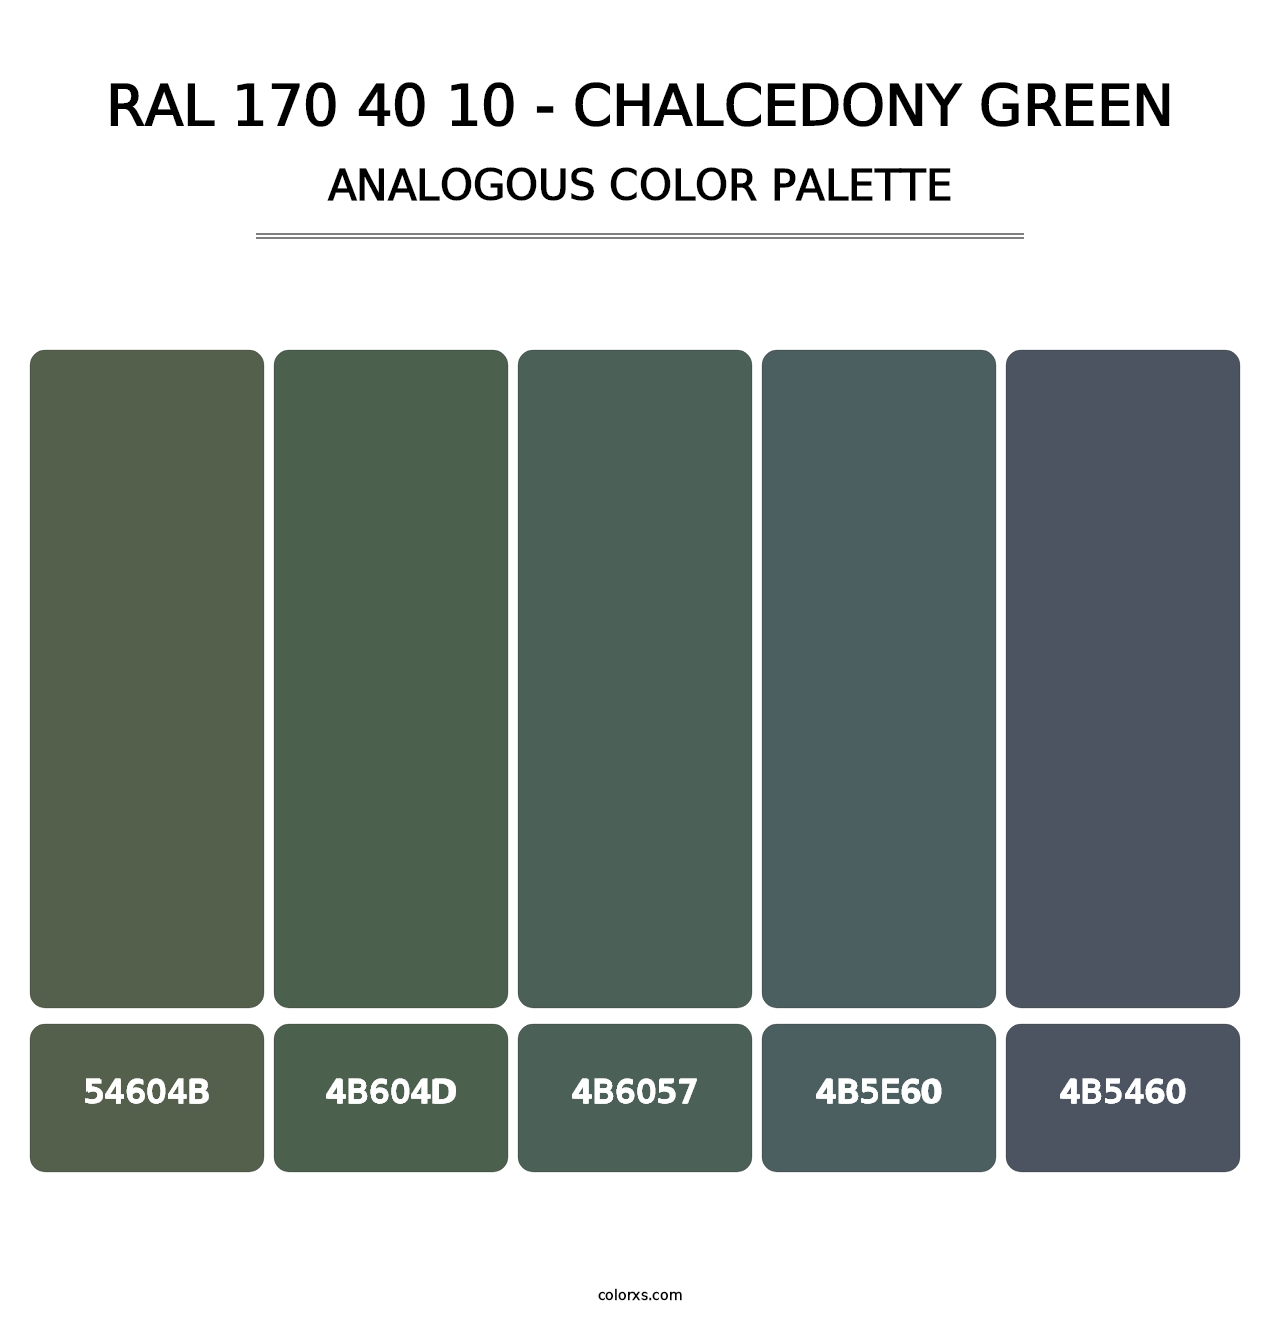 RAL 170 40 10 - Chalcedony Green - Analogous Color Palette